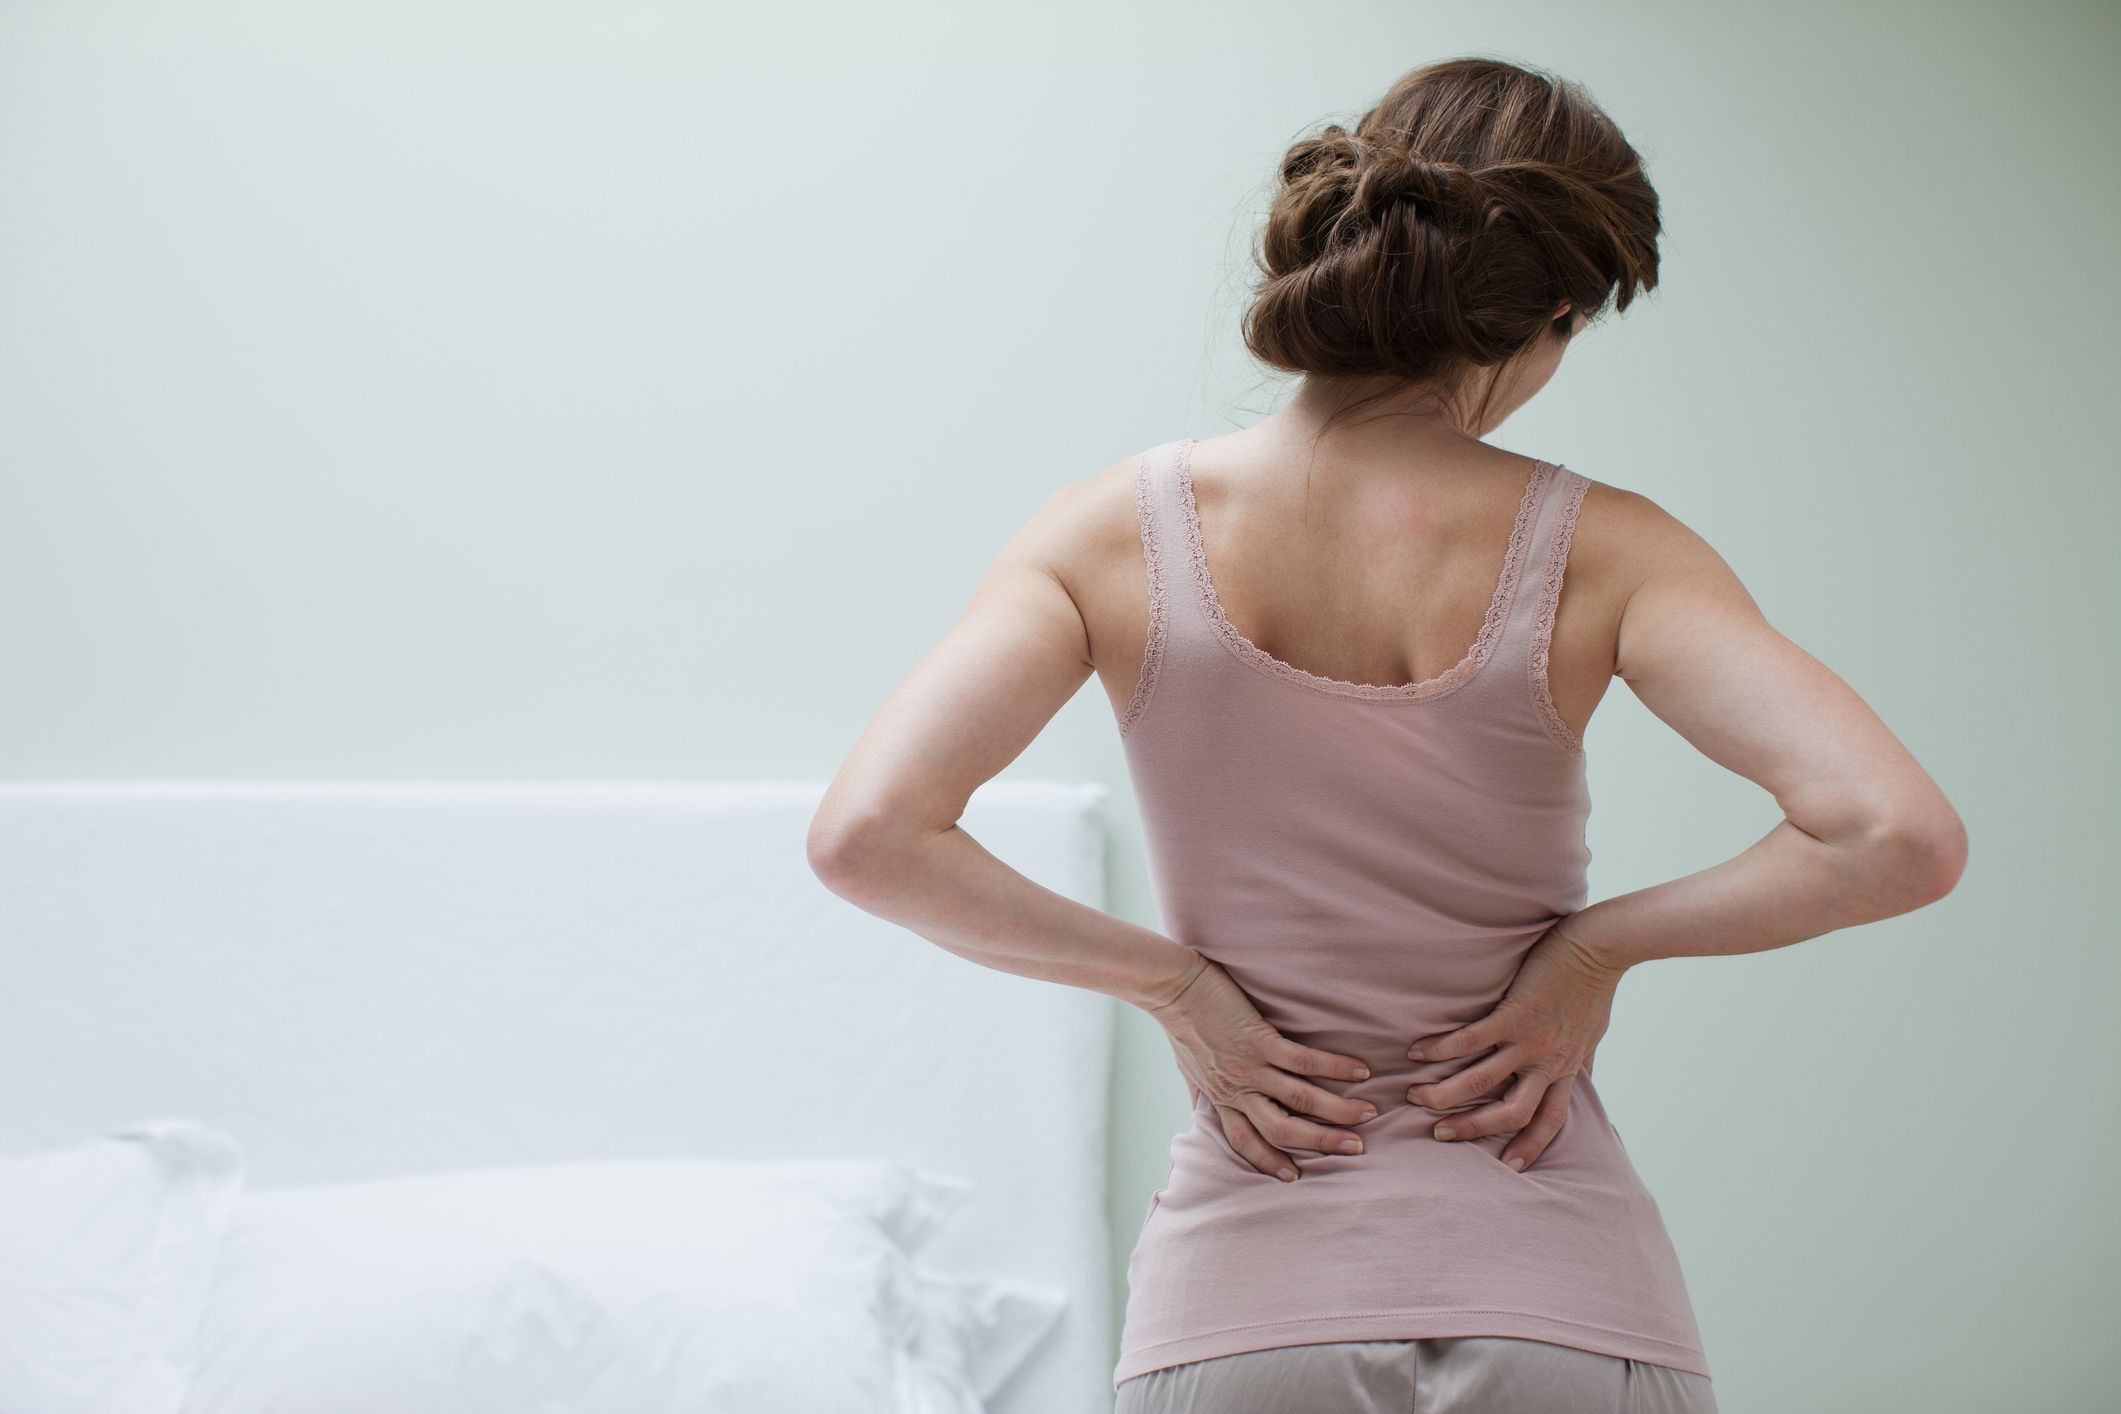 Stop Fighting Upper Back Pain and Start Living Again!